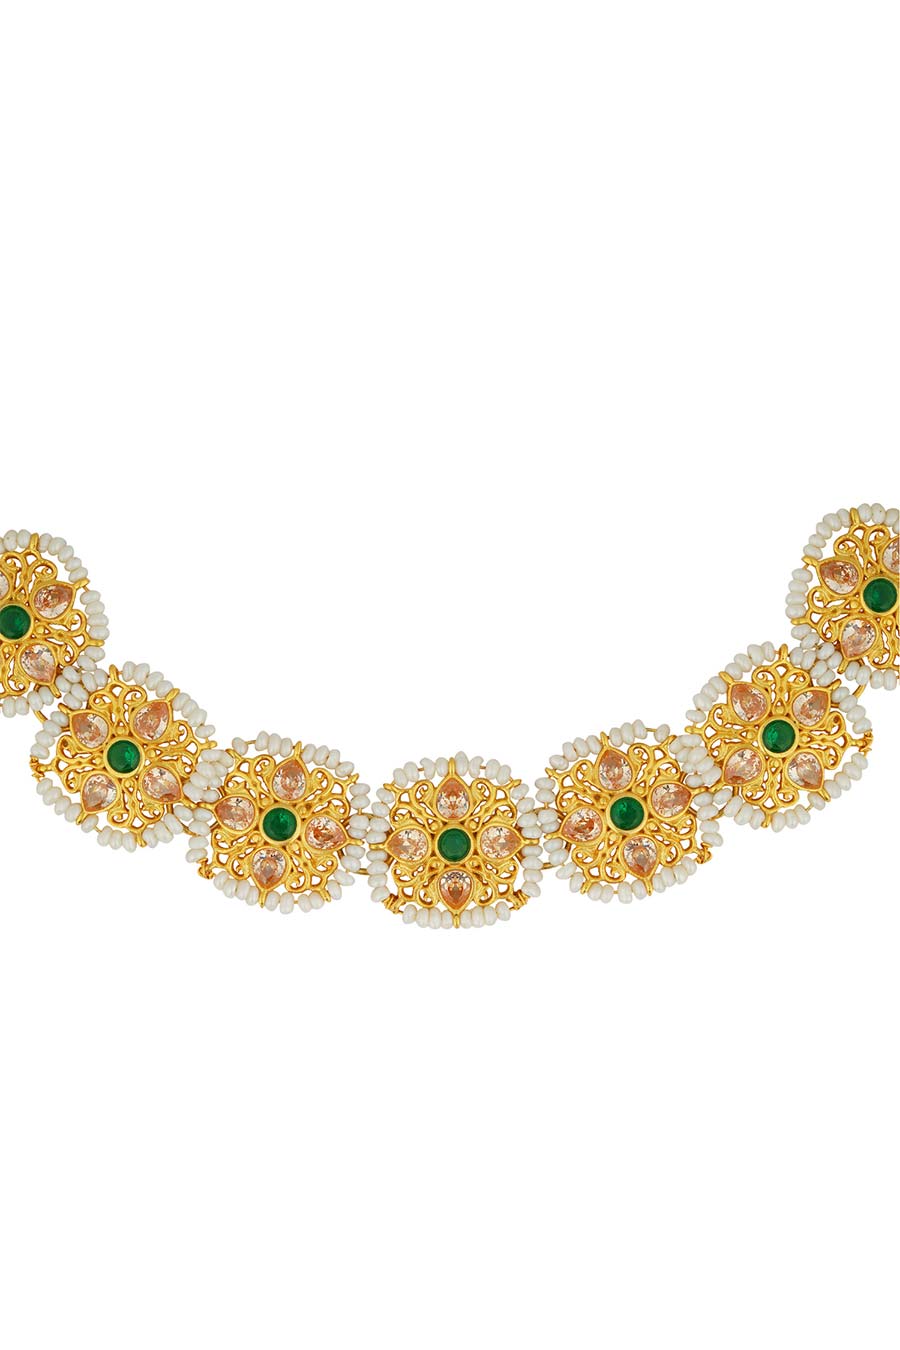 Begum Gold Plated Choker Necklace